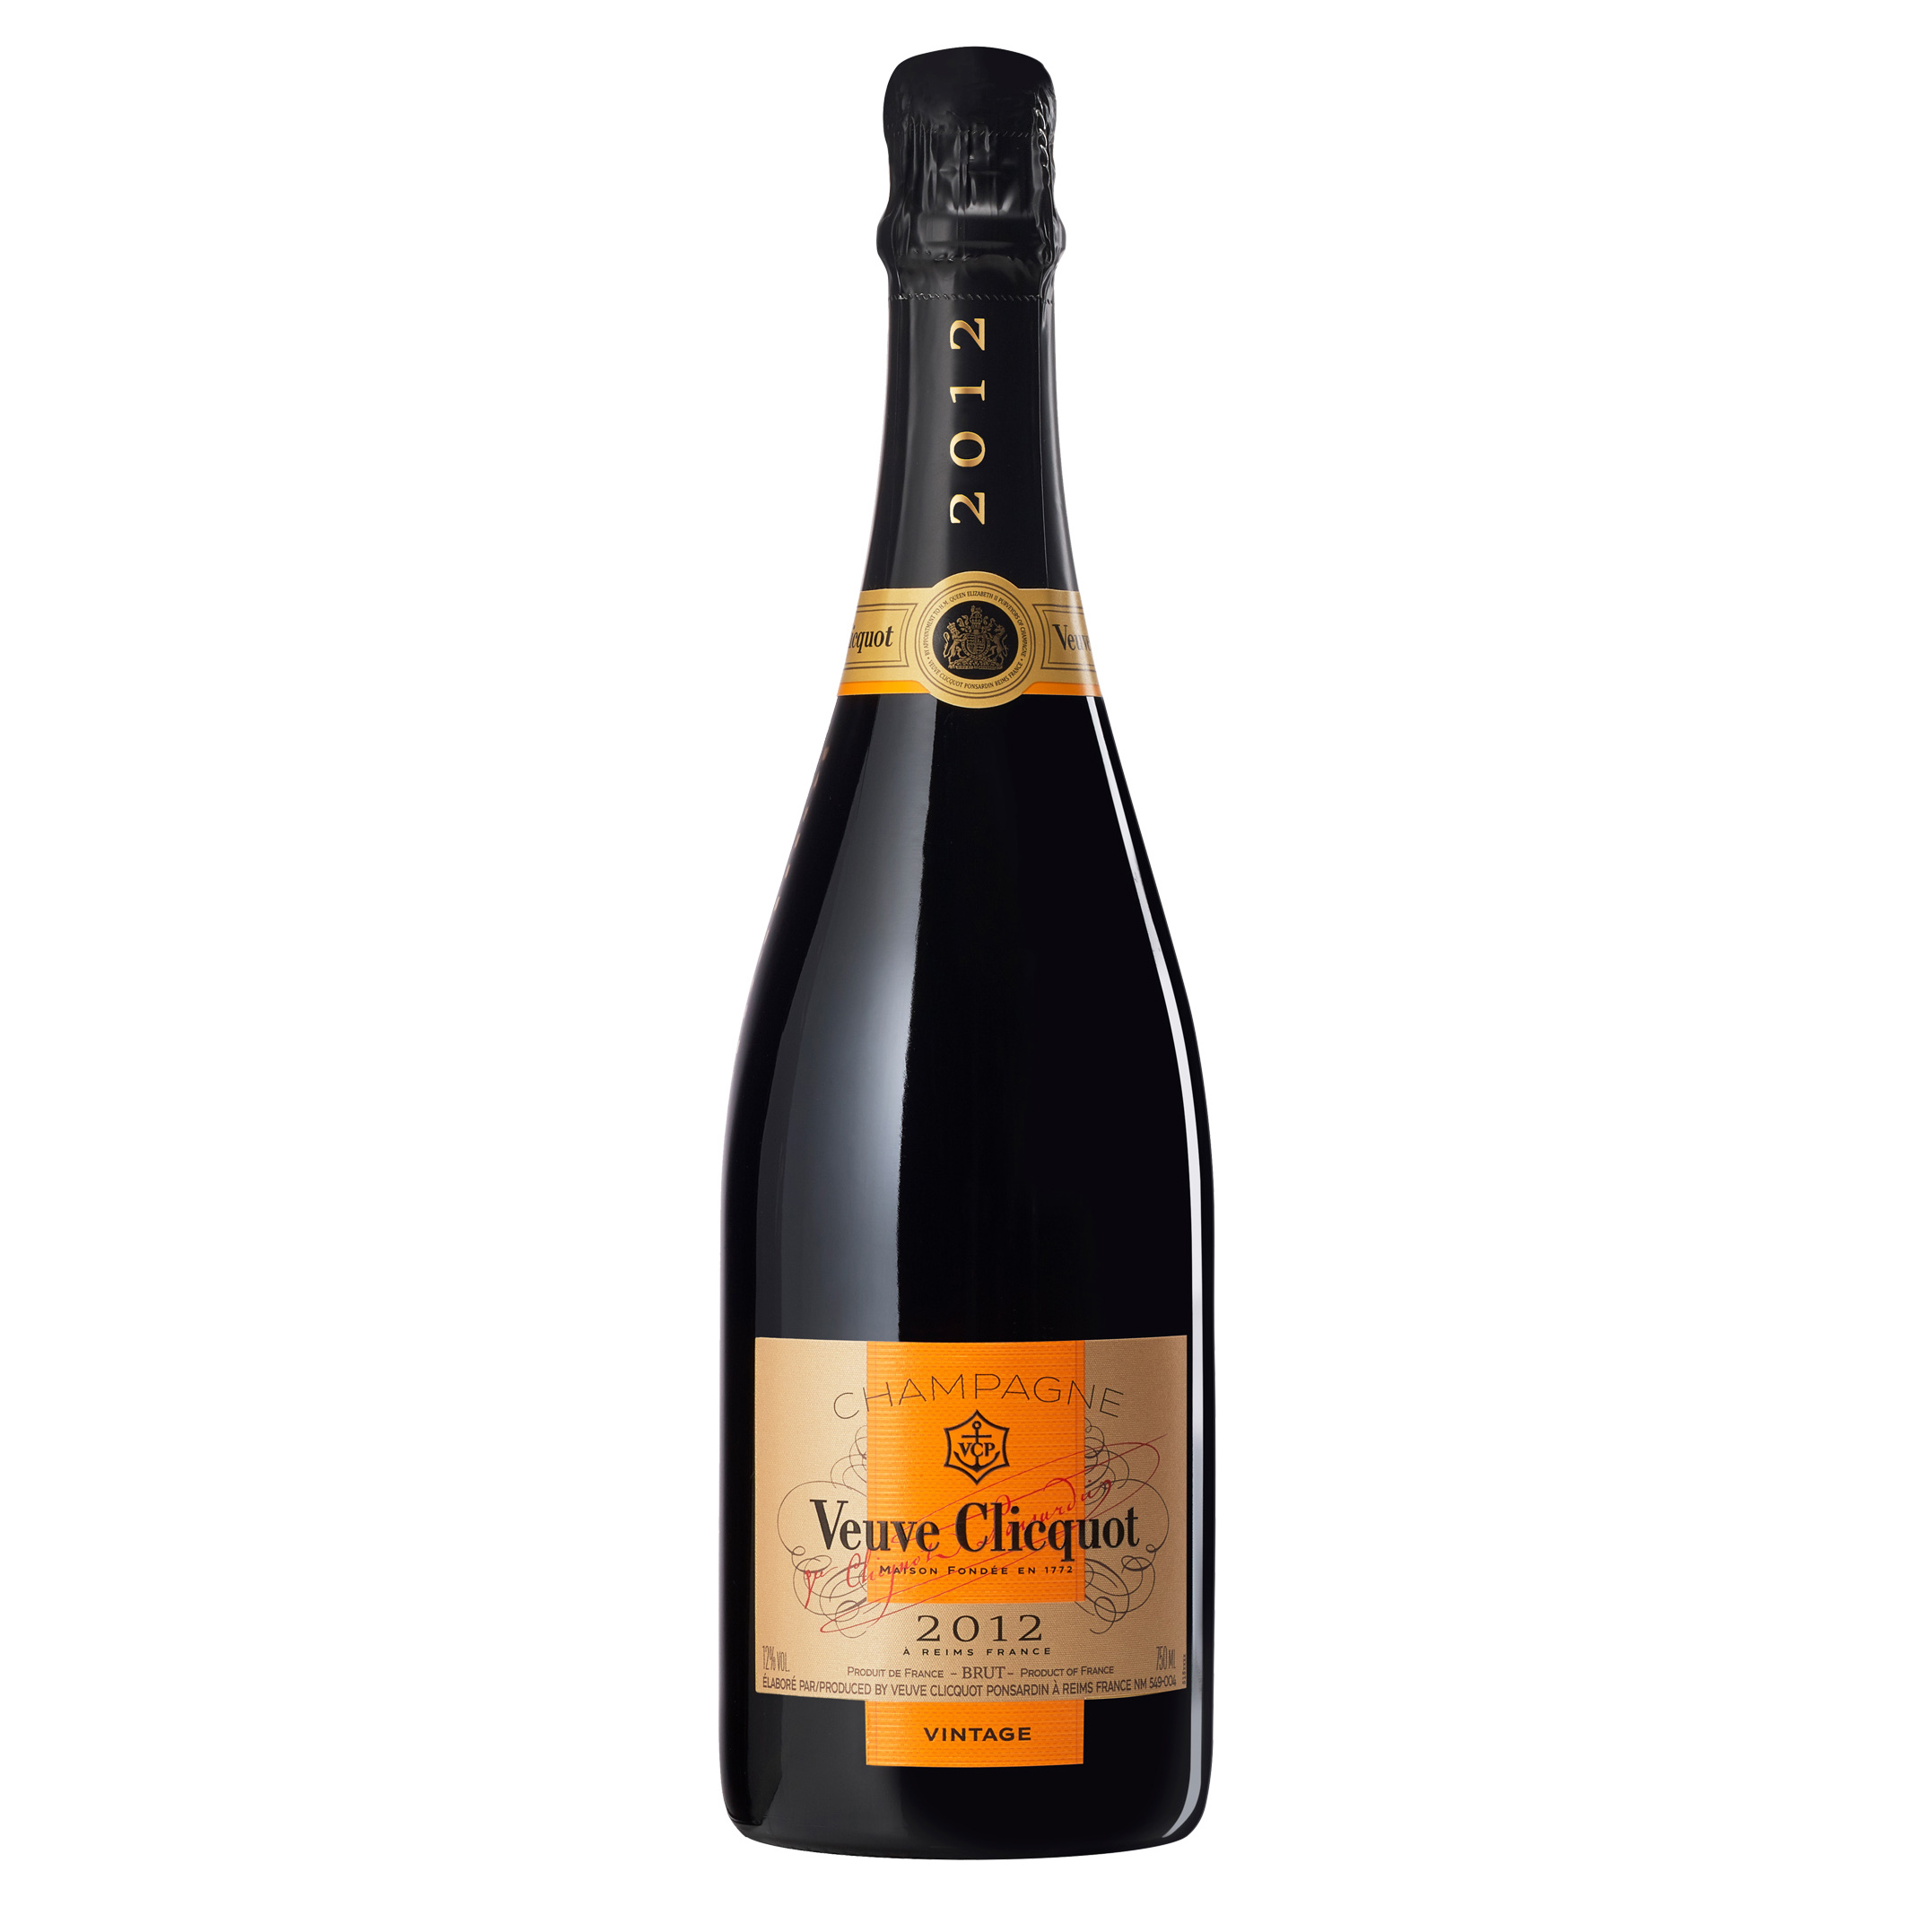 Buy And Send Veuve Clicquot ,Vintage, 2012 Gift Online